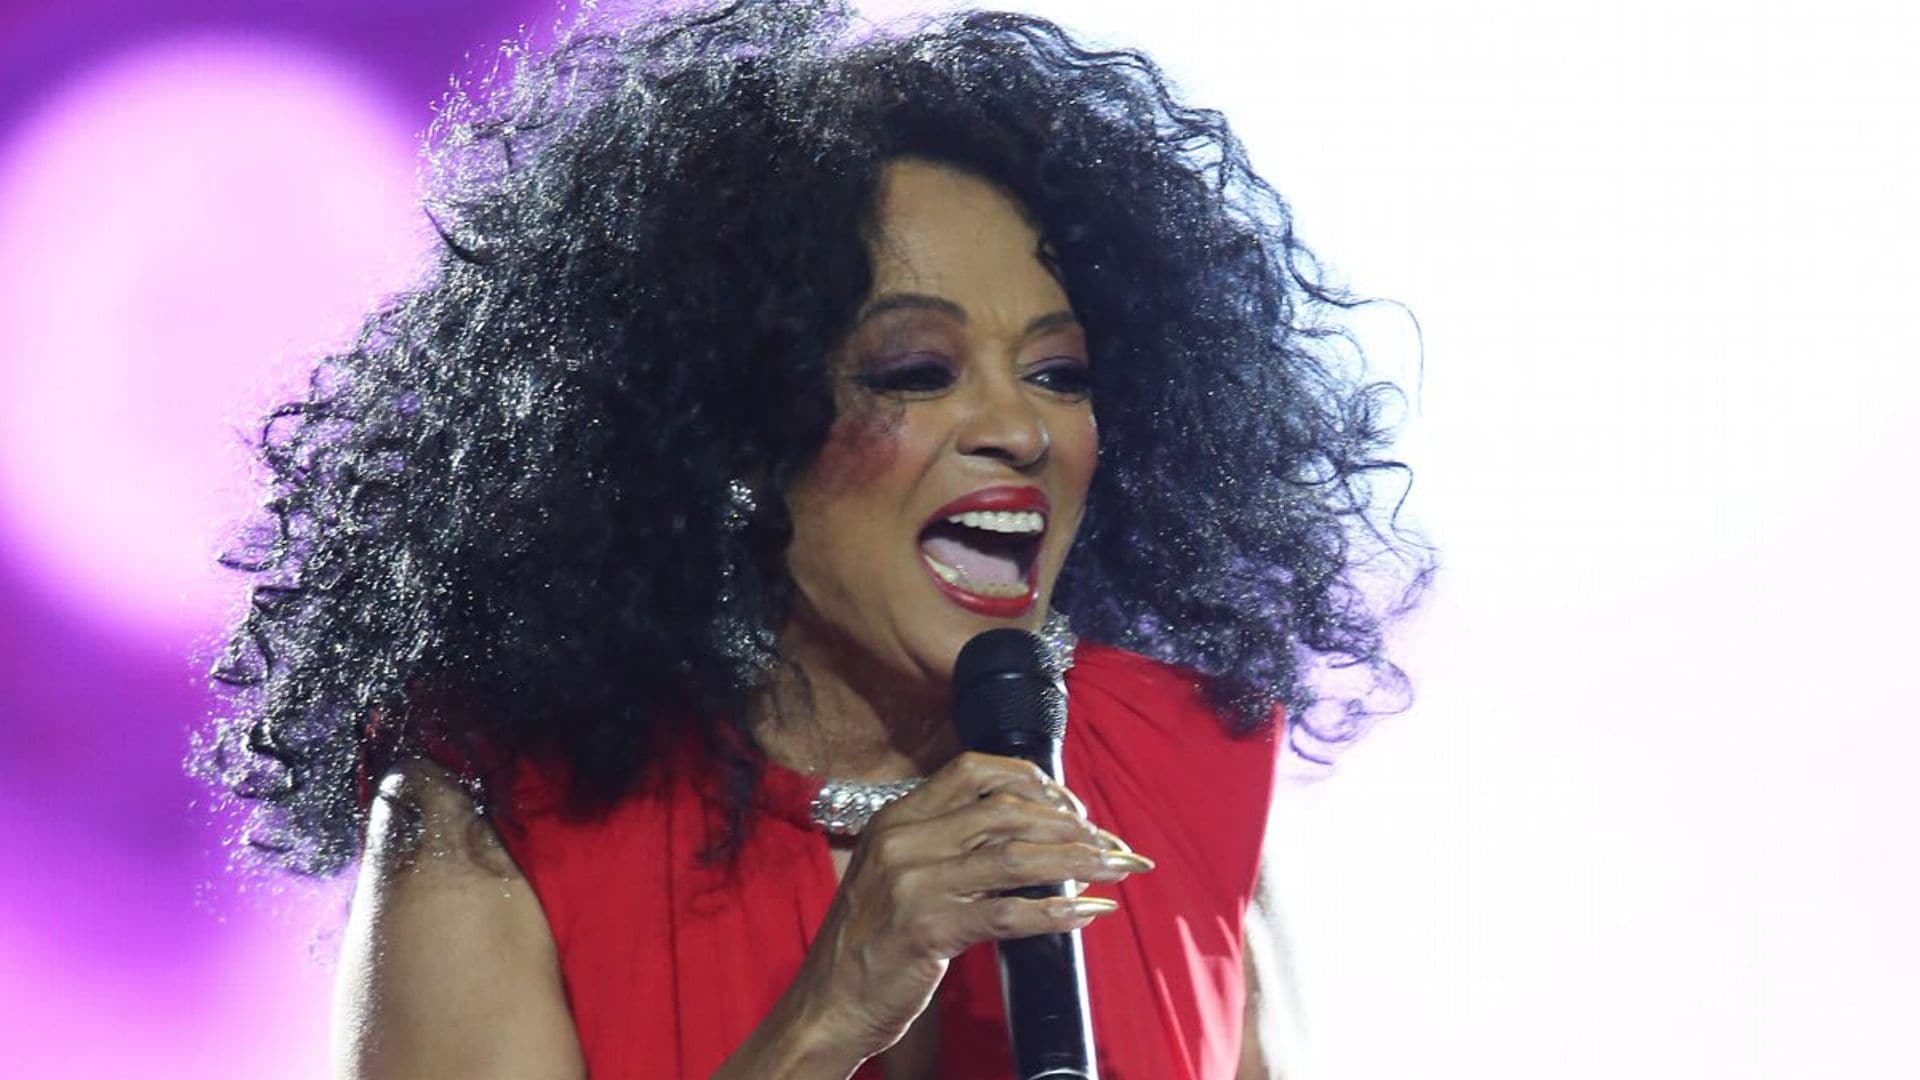 After 15 years, Diana Ross is releasing new album ‘Thank You’